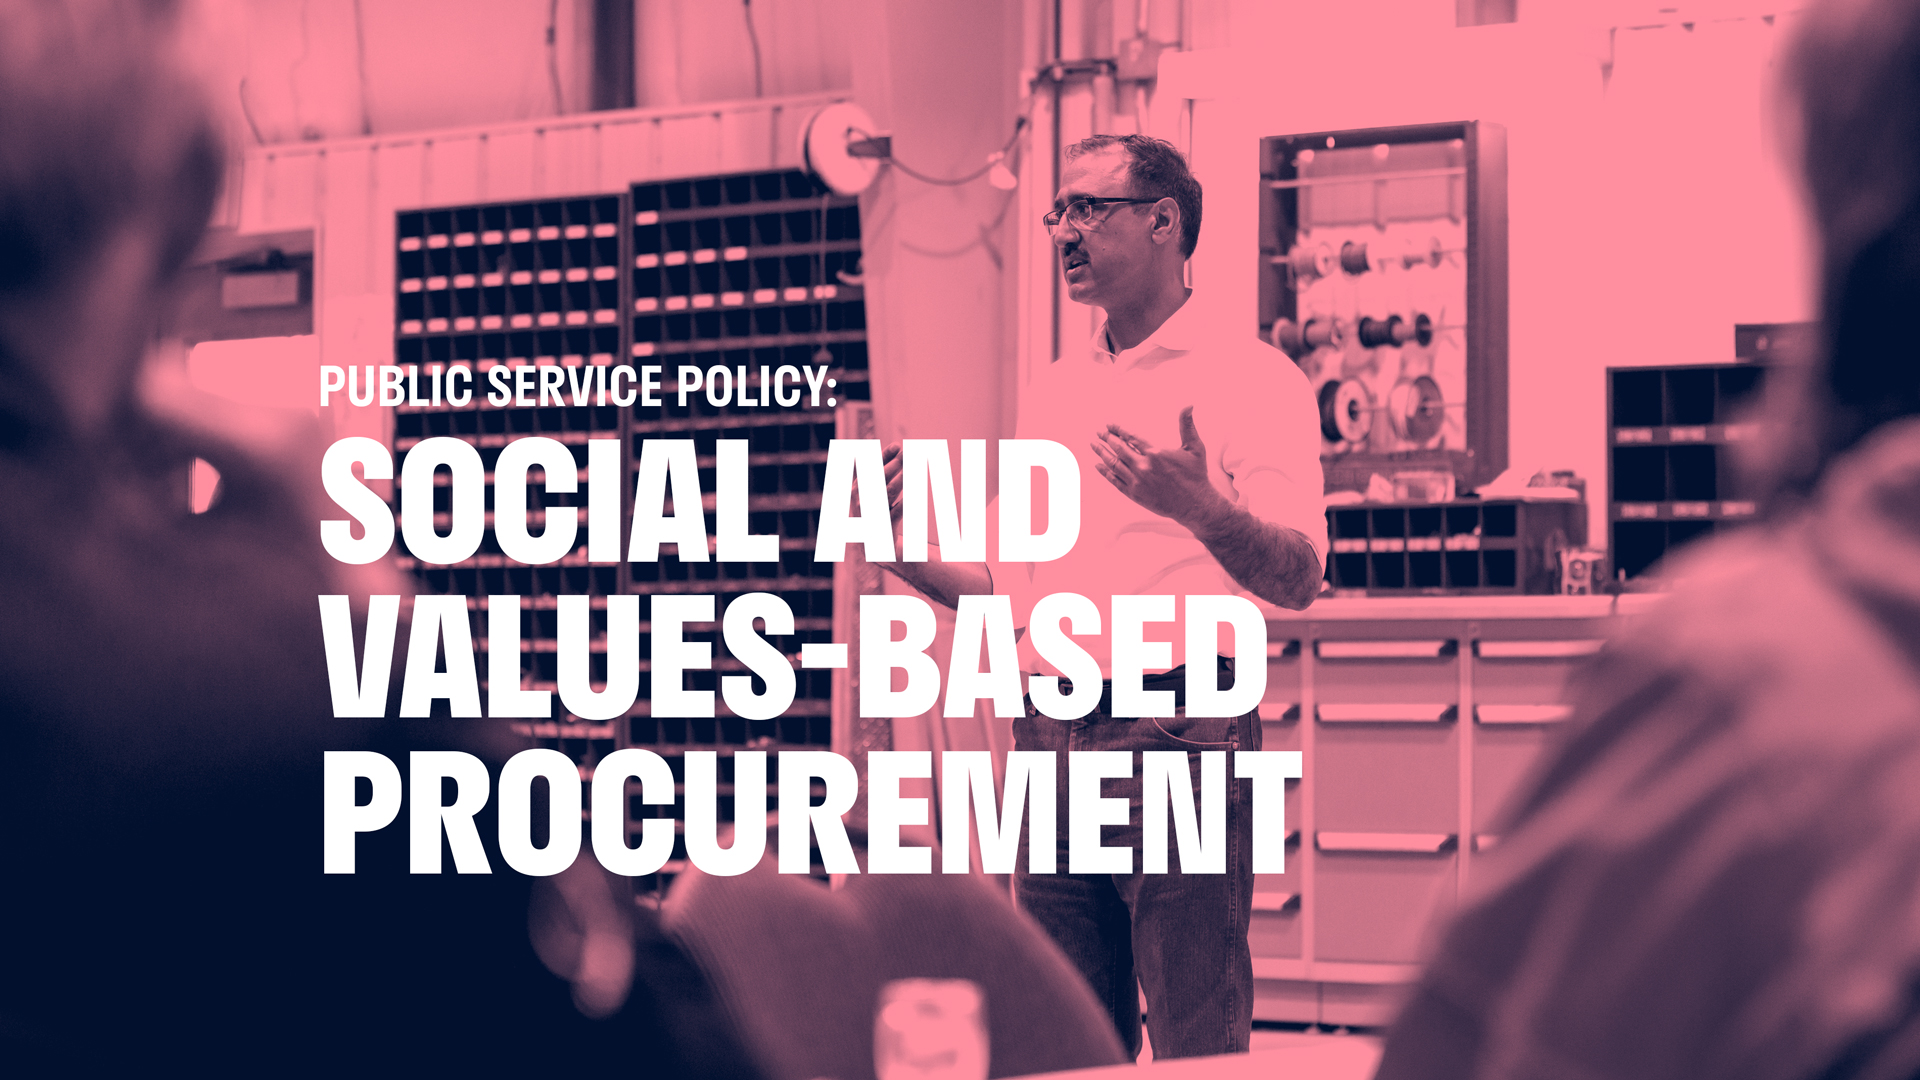 An image of Amarjeet speaking to a group of a people. The text overlay reads: "Public Services Policy: Social and Values-Based Procurement"